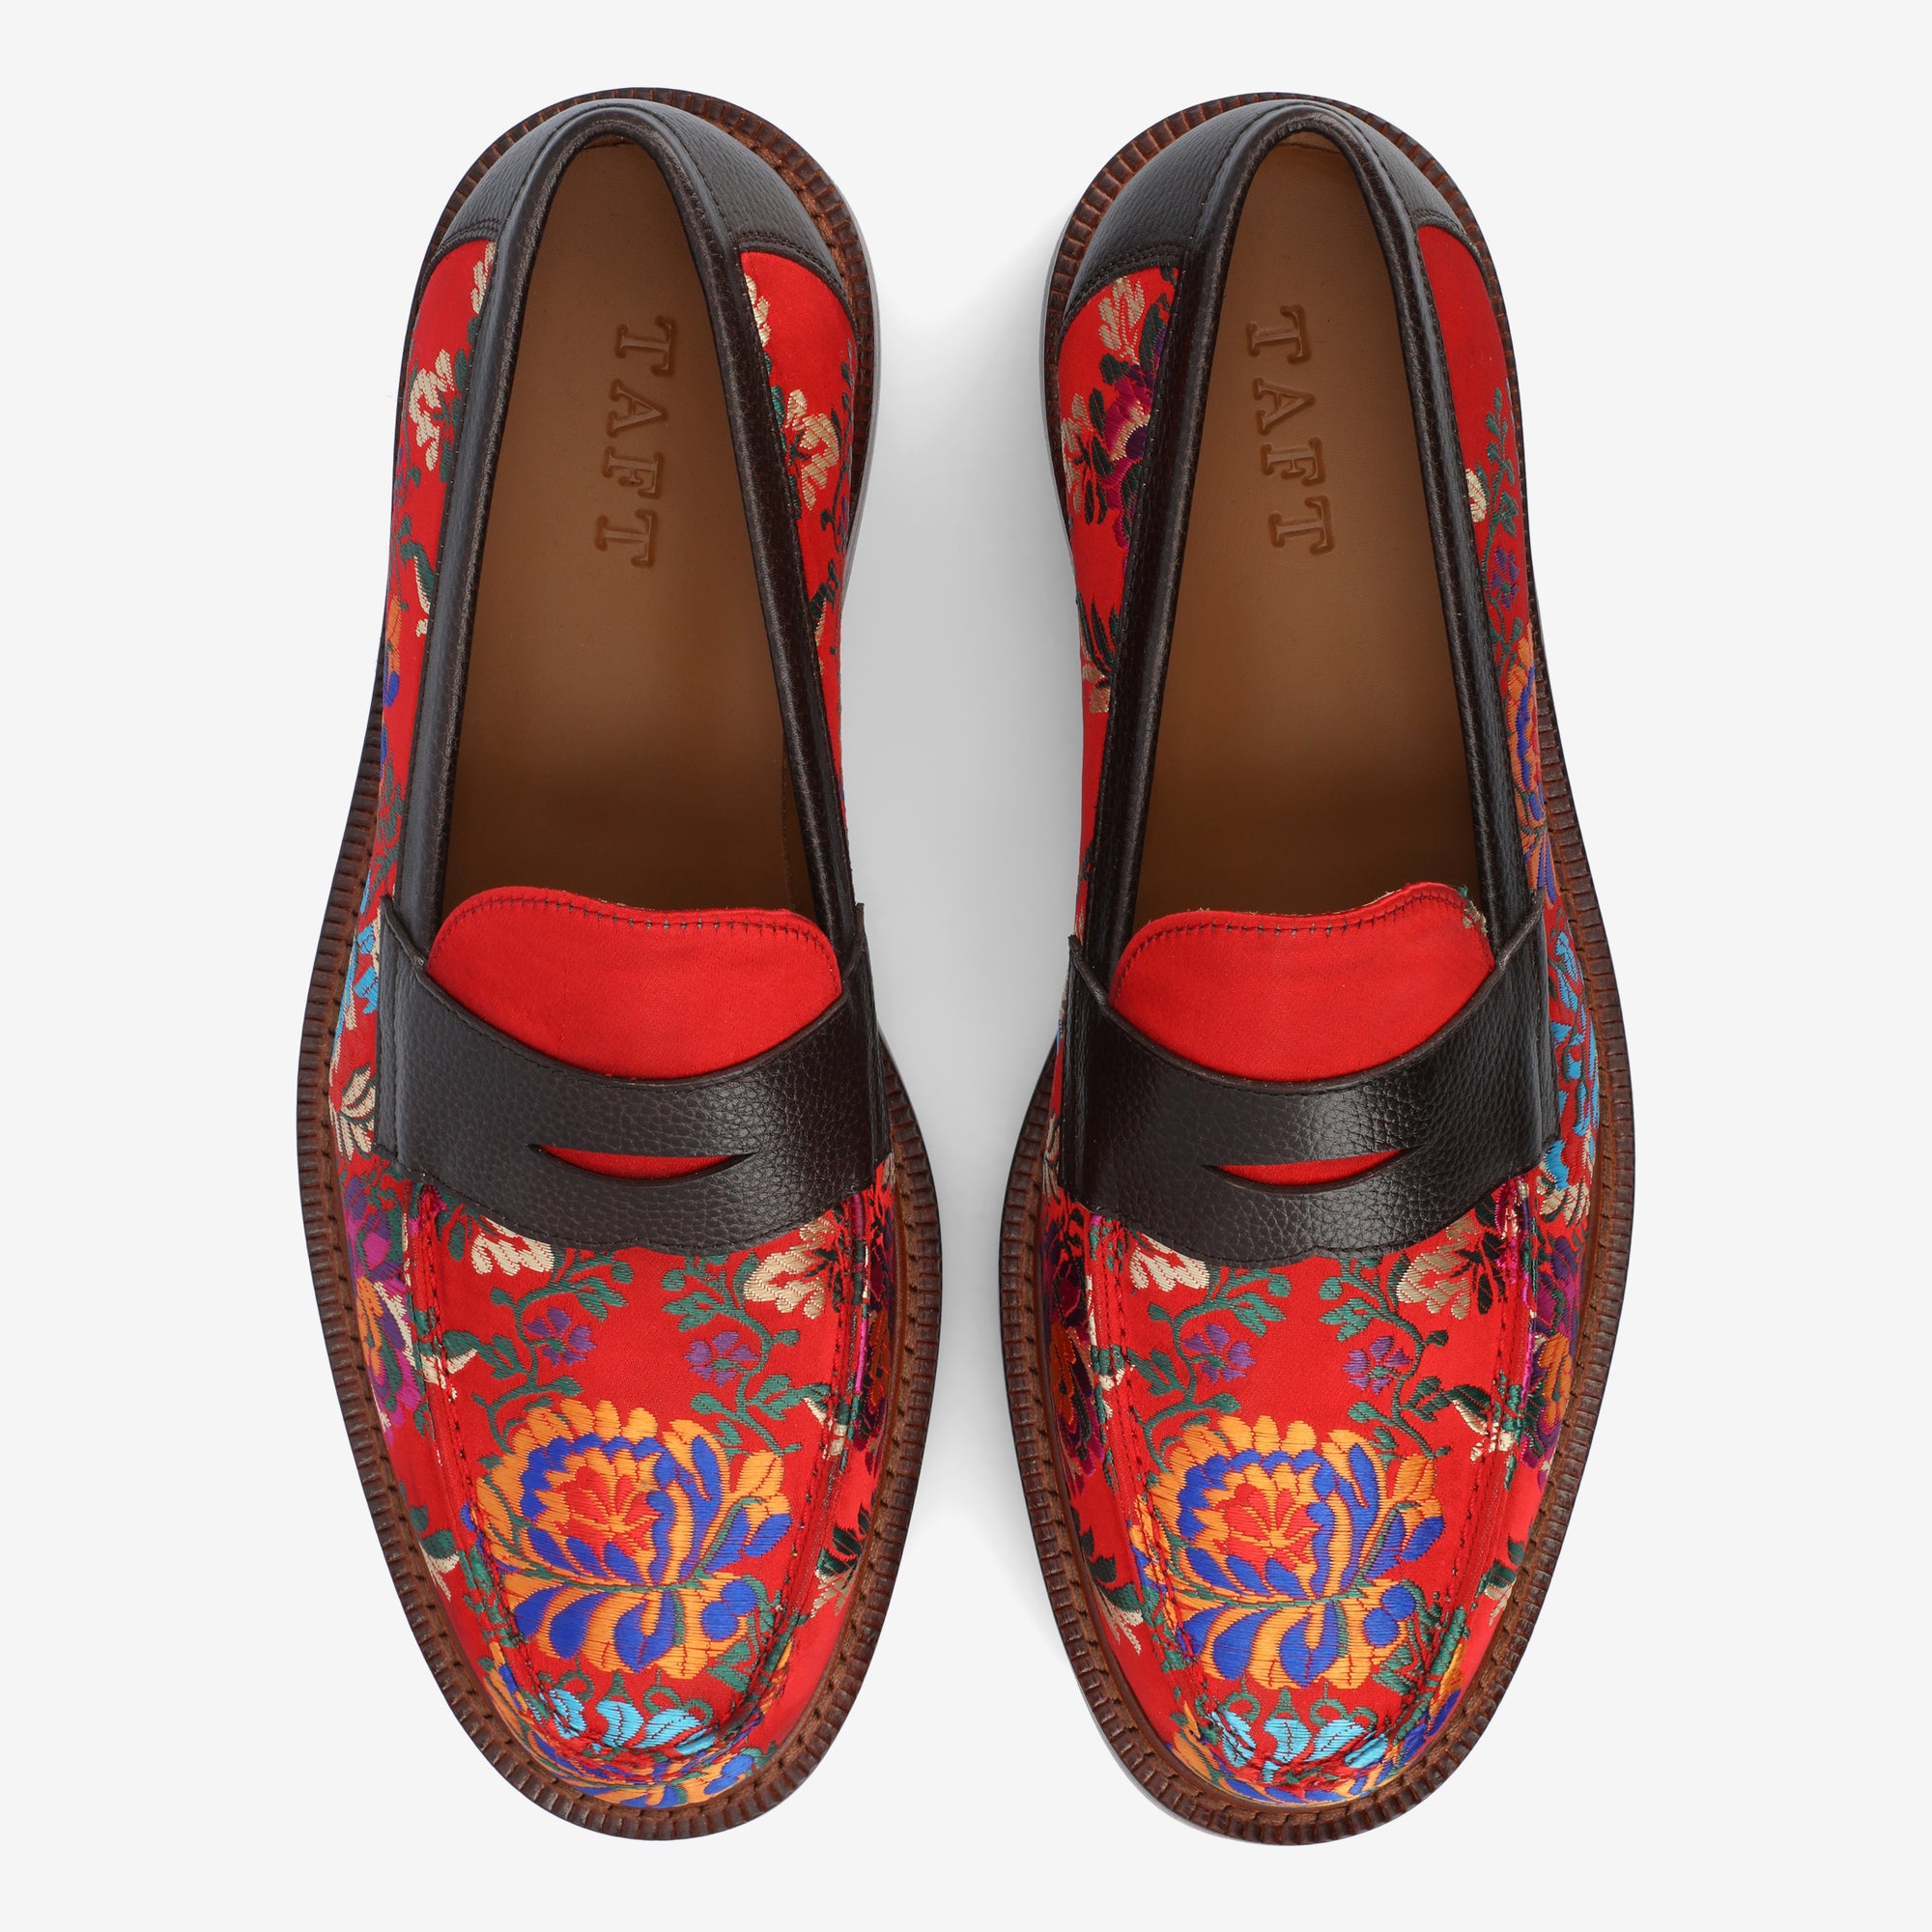 The Fitz Loafer in Fiore